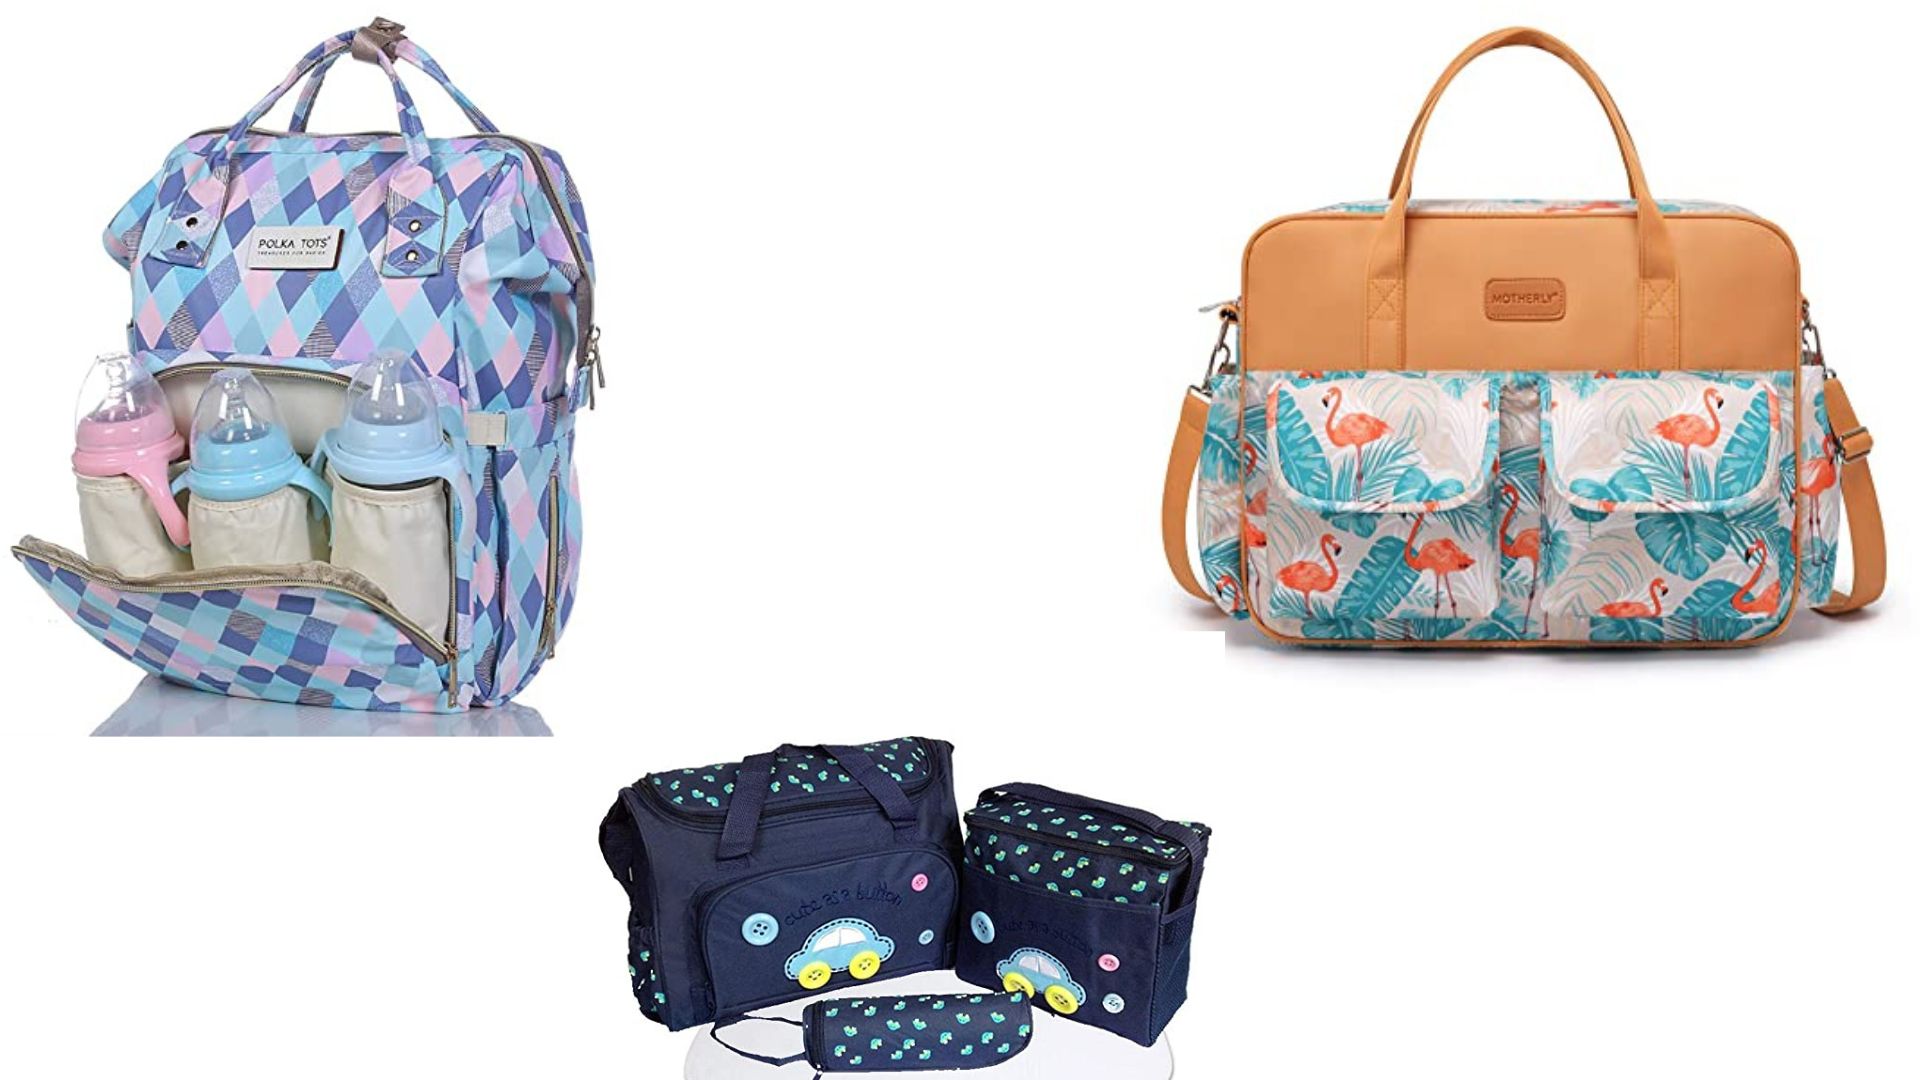 Top 12 Diaper Bags in India With Price & Availability 